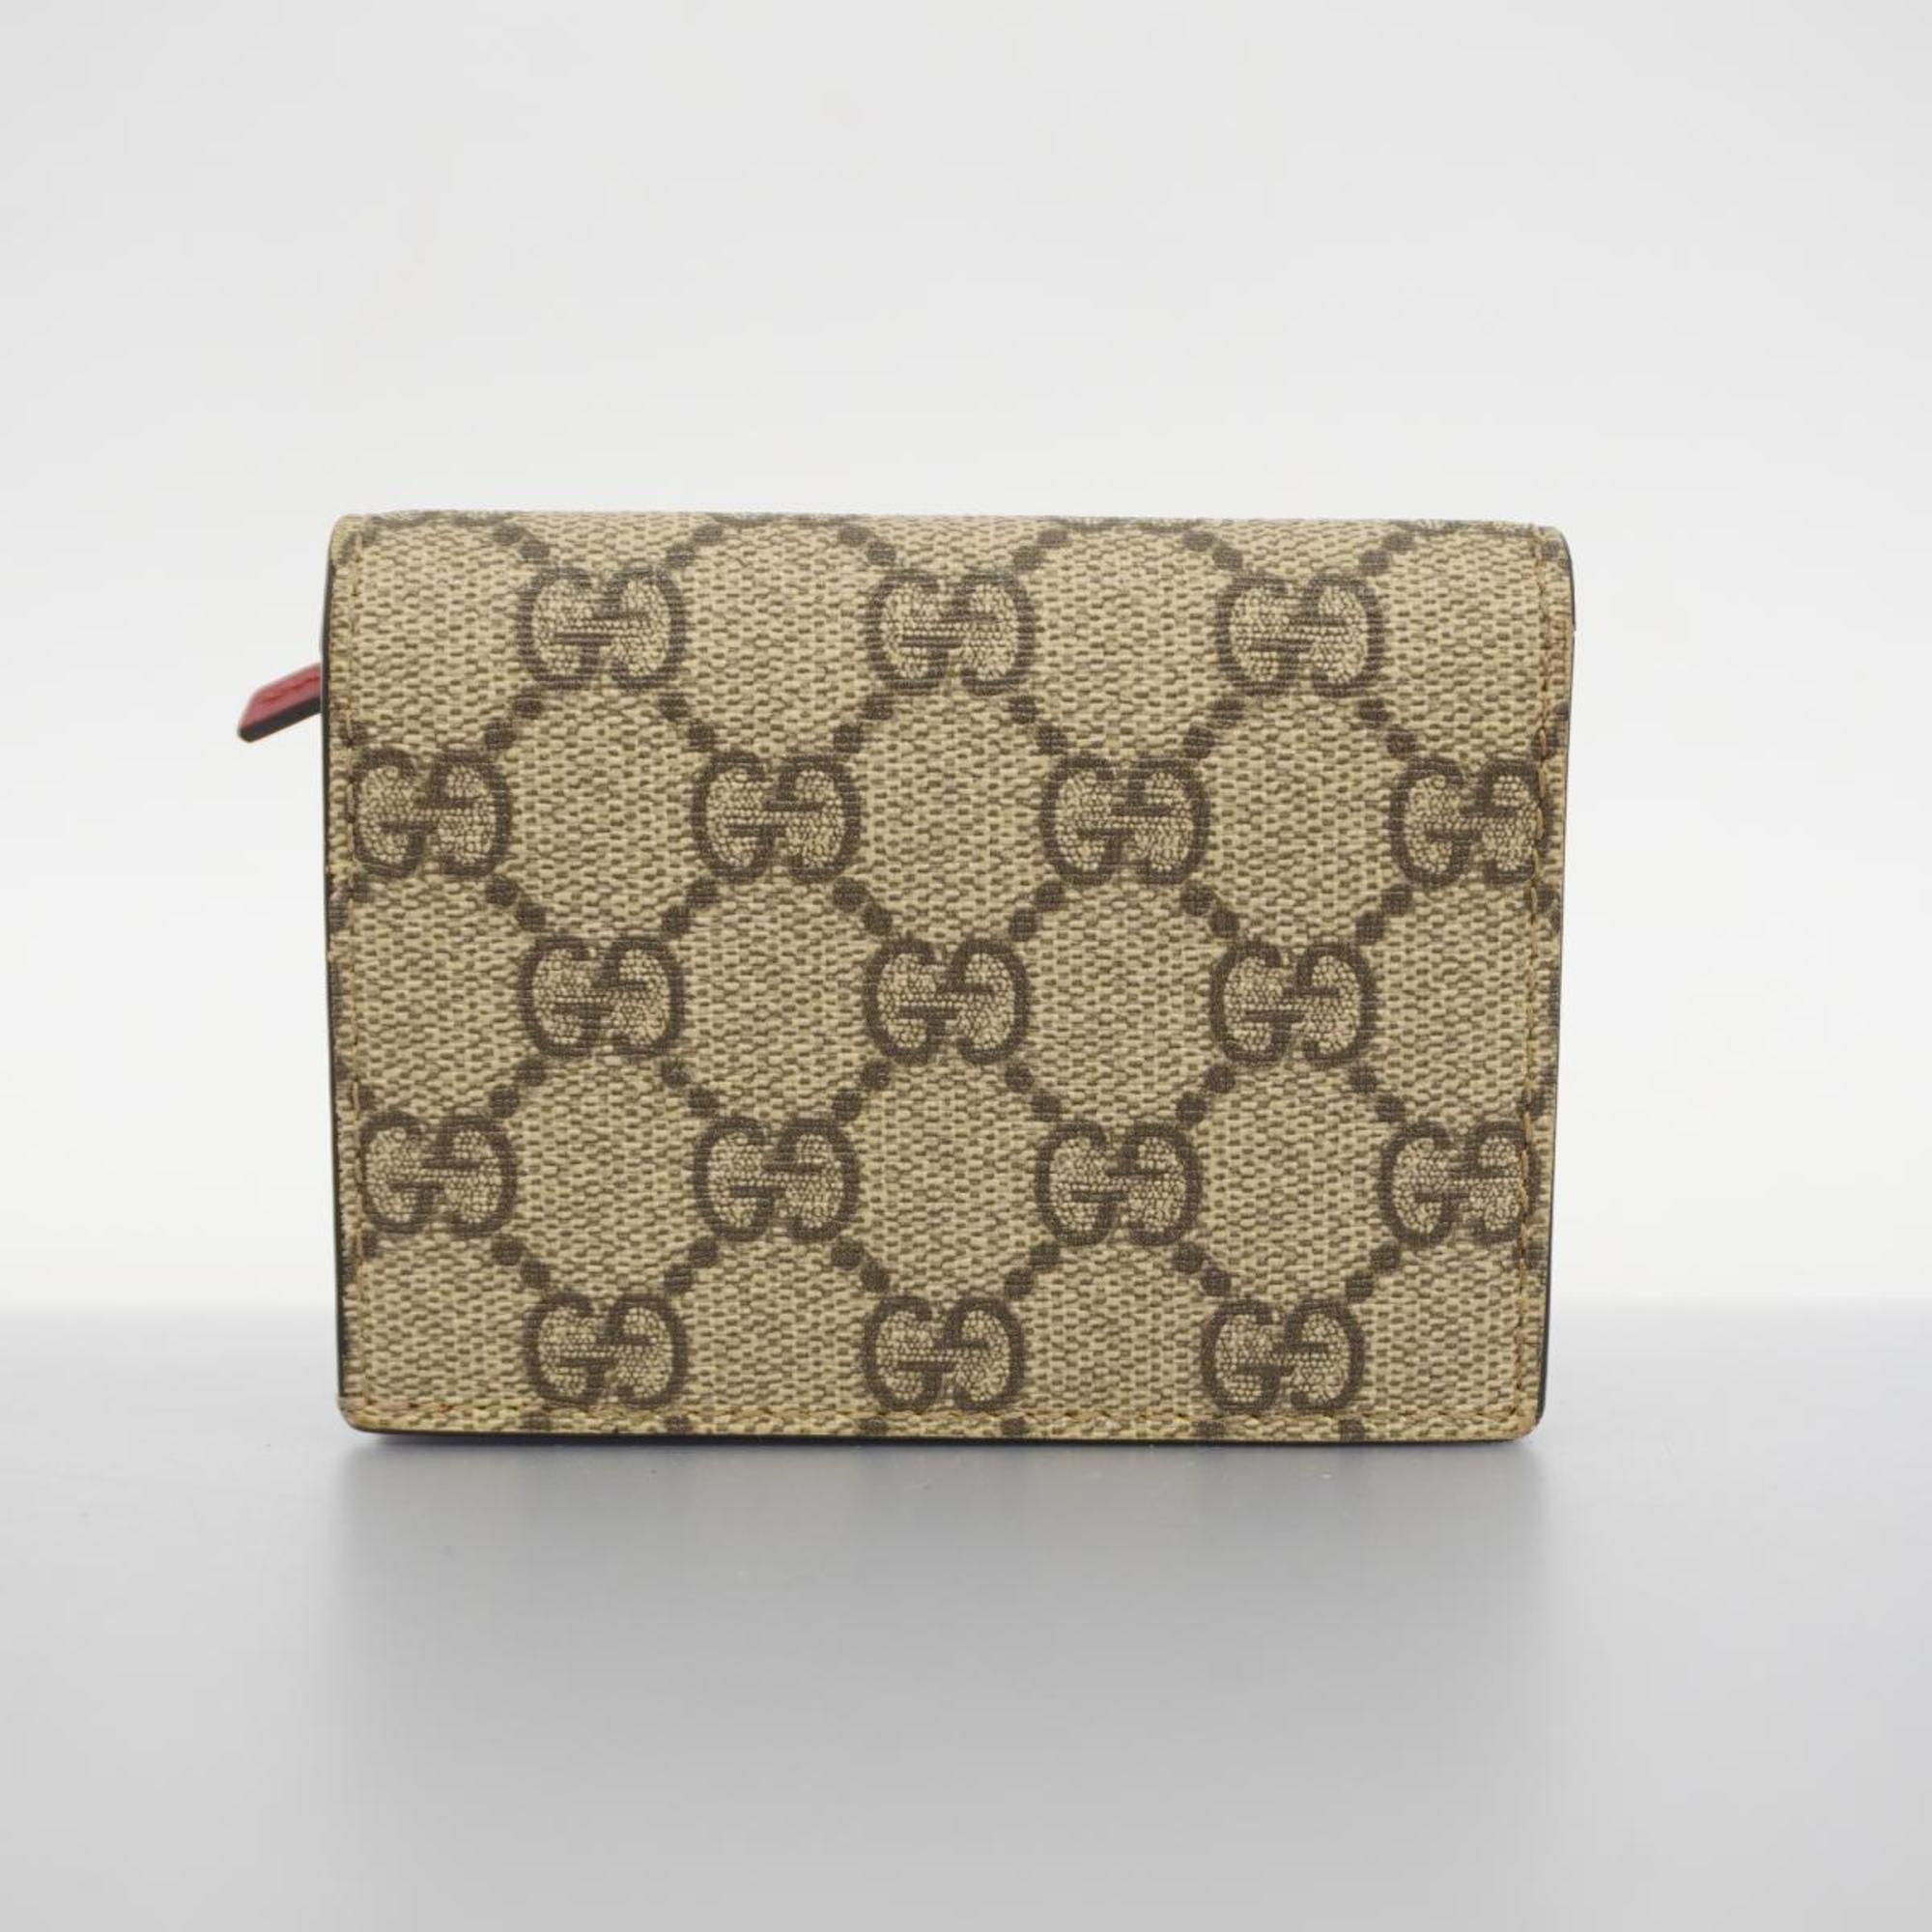 Gucci Wallet GG Supreme 476050 Brown Red Women's